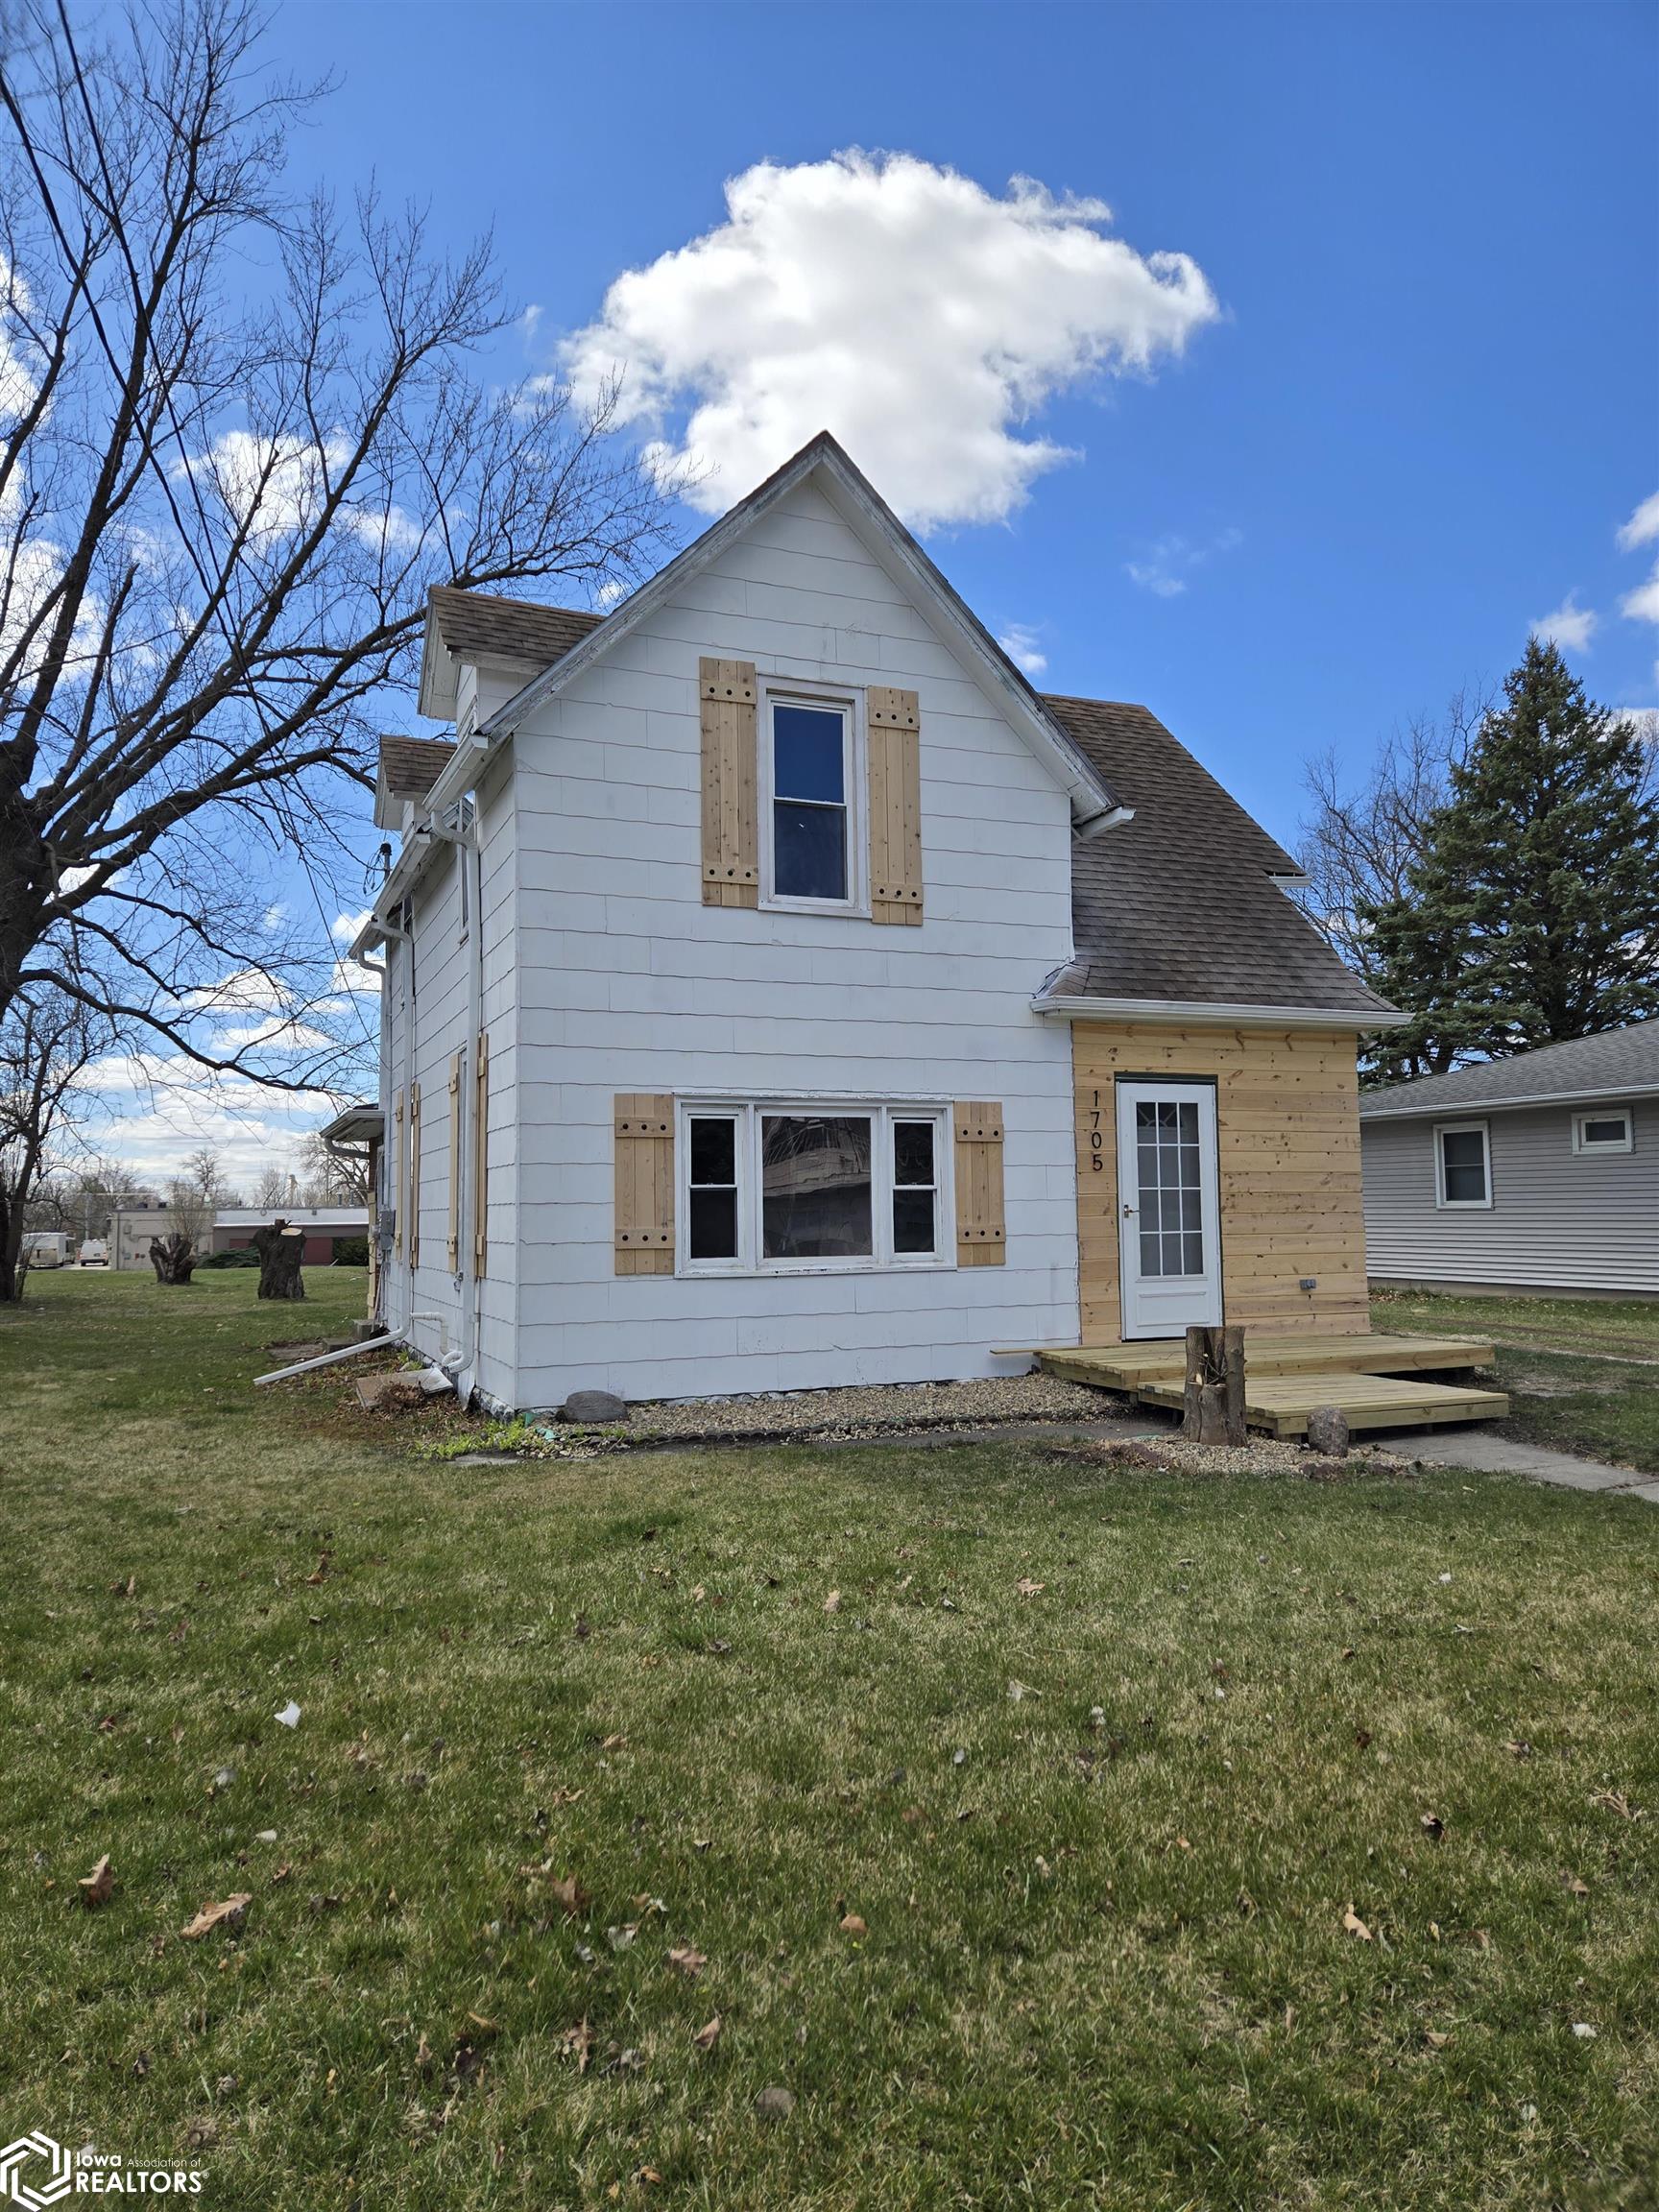 1705 14th Ave., Eldora, Iowa 50627, 3 Bedrooms Bedrooms, ,1 BathroomBathrooms,Single Family,For Sale,14th Ave.,6316381